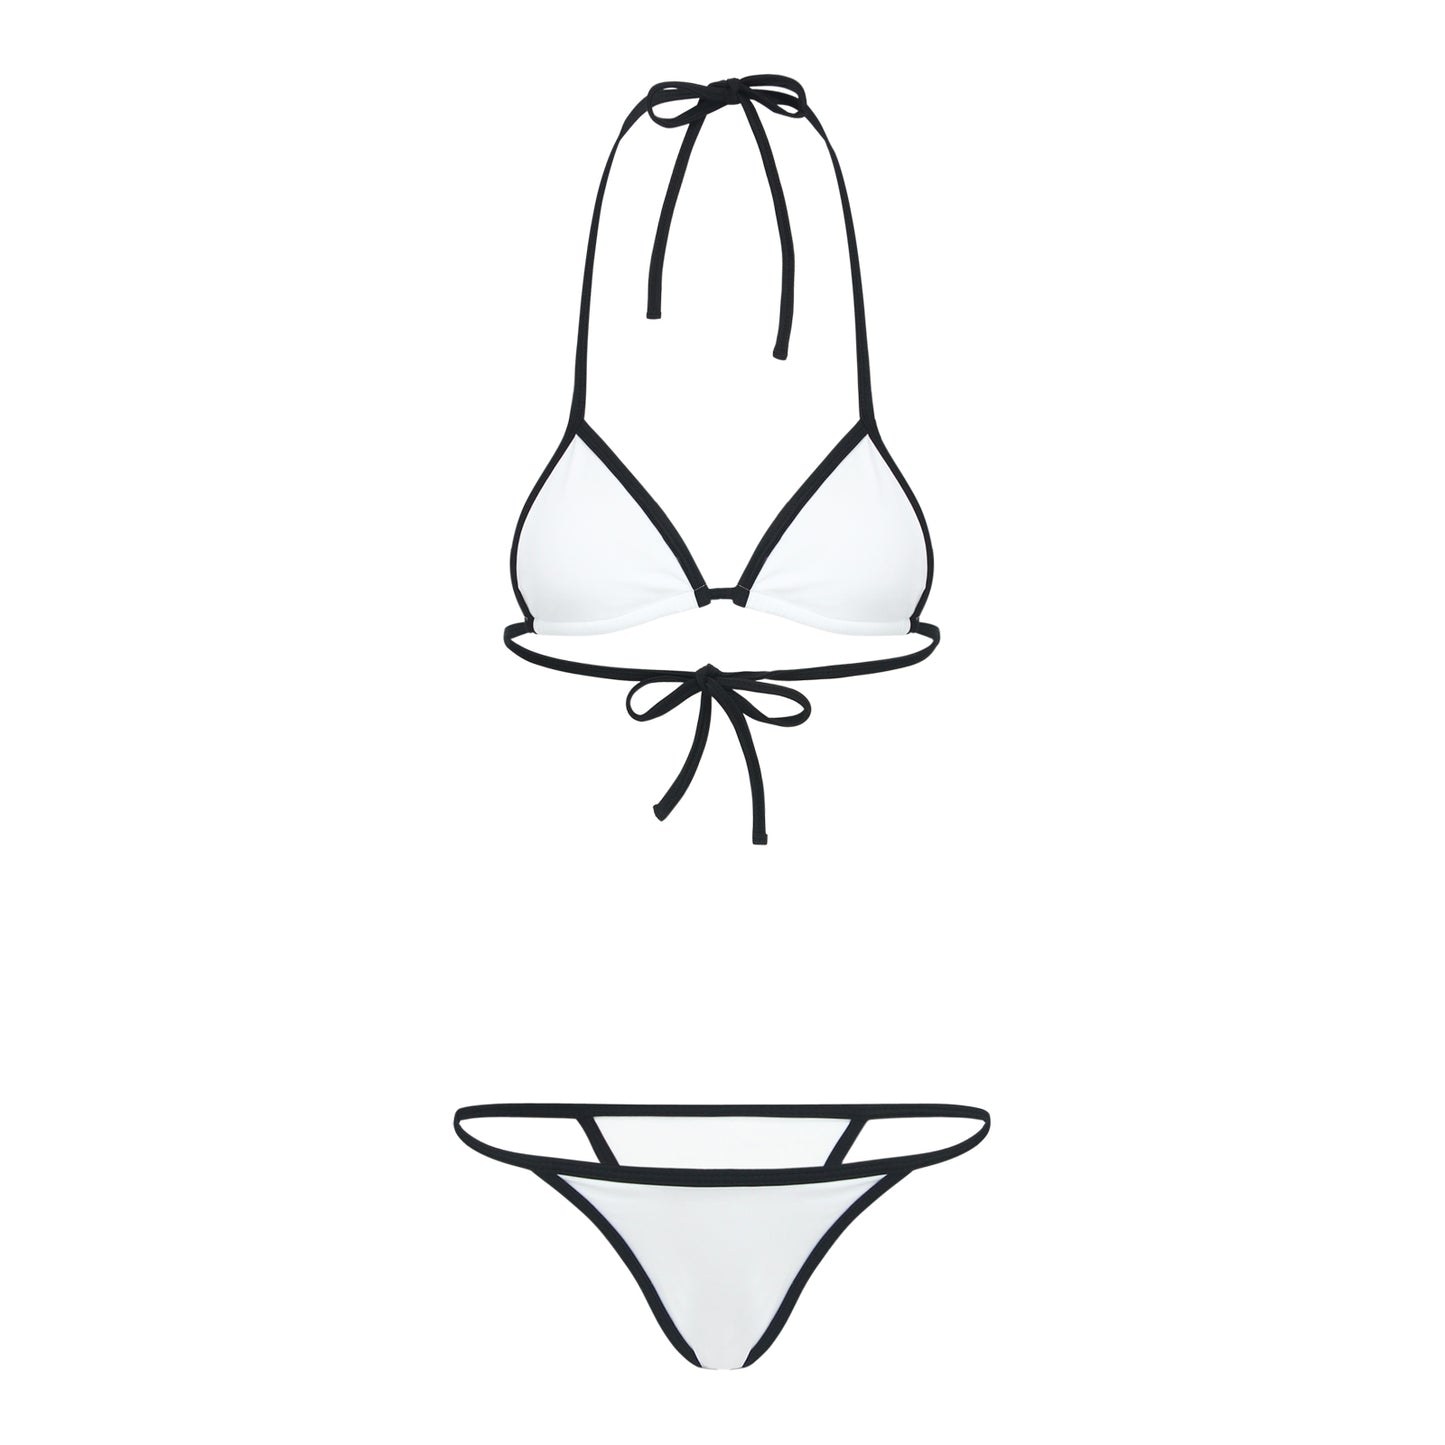 The Vida is a classic bikini set, with a string tie bikini top and cheeky bottoms. Made with sustainable fabric. 